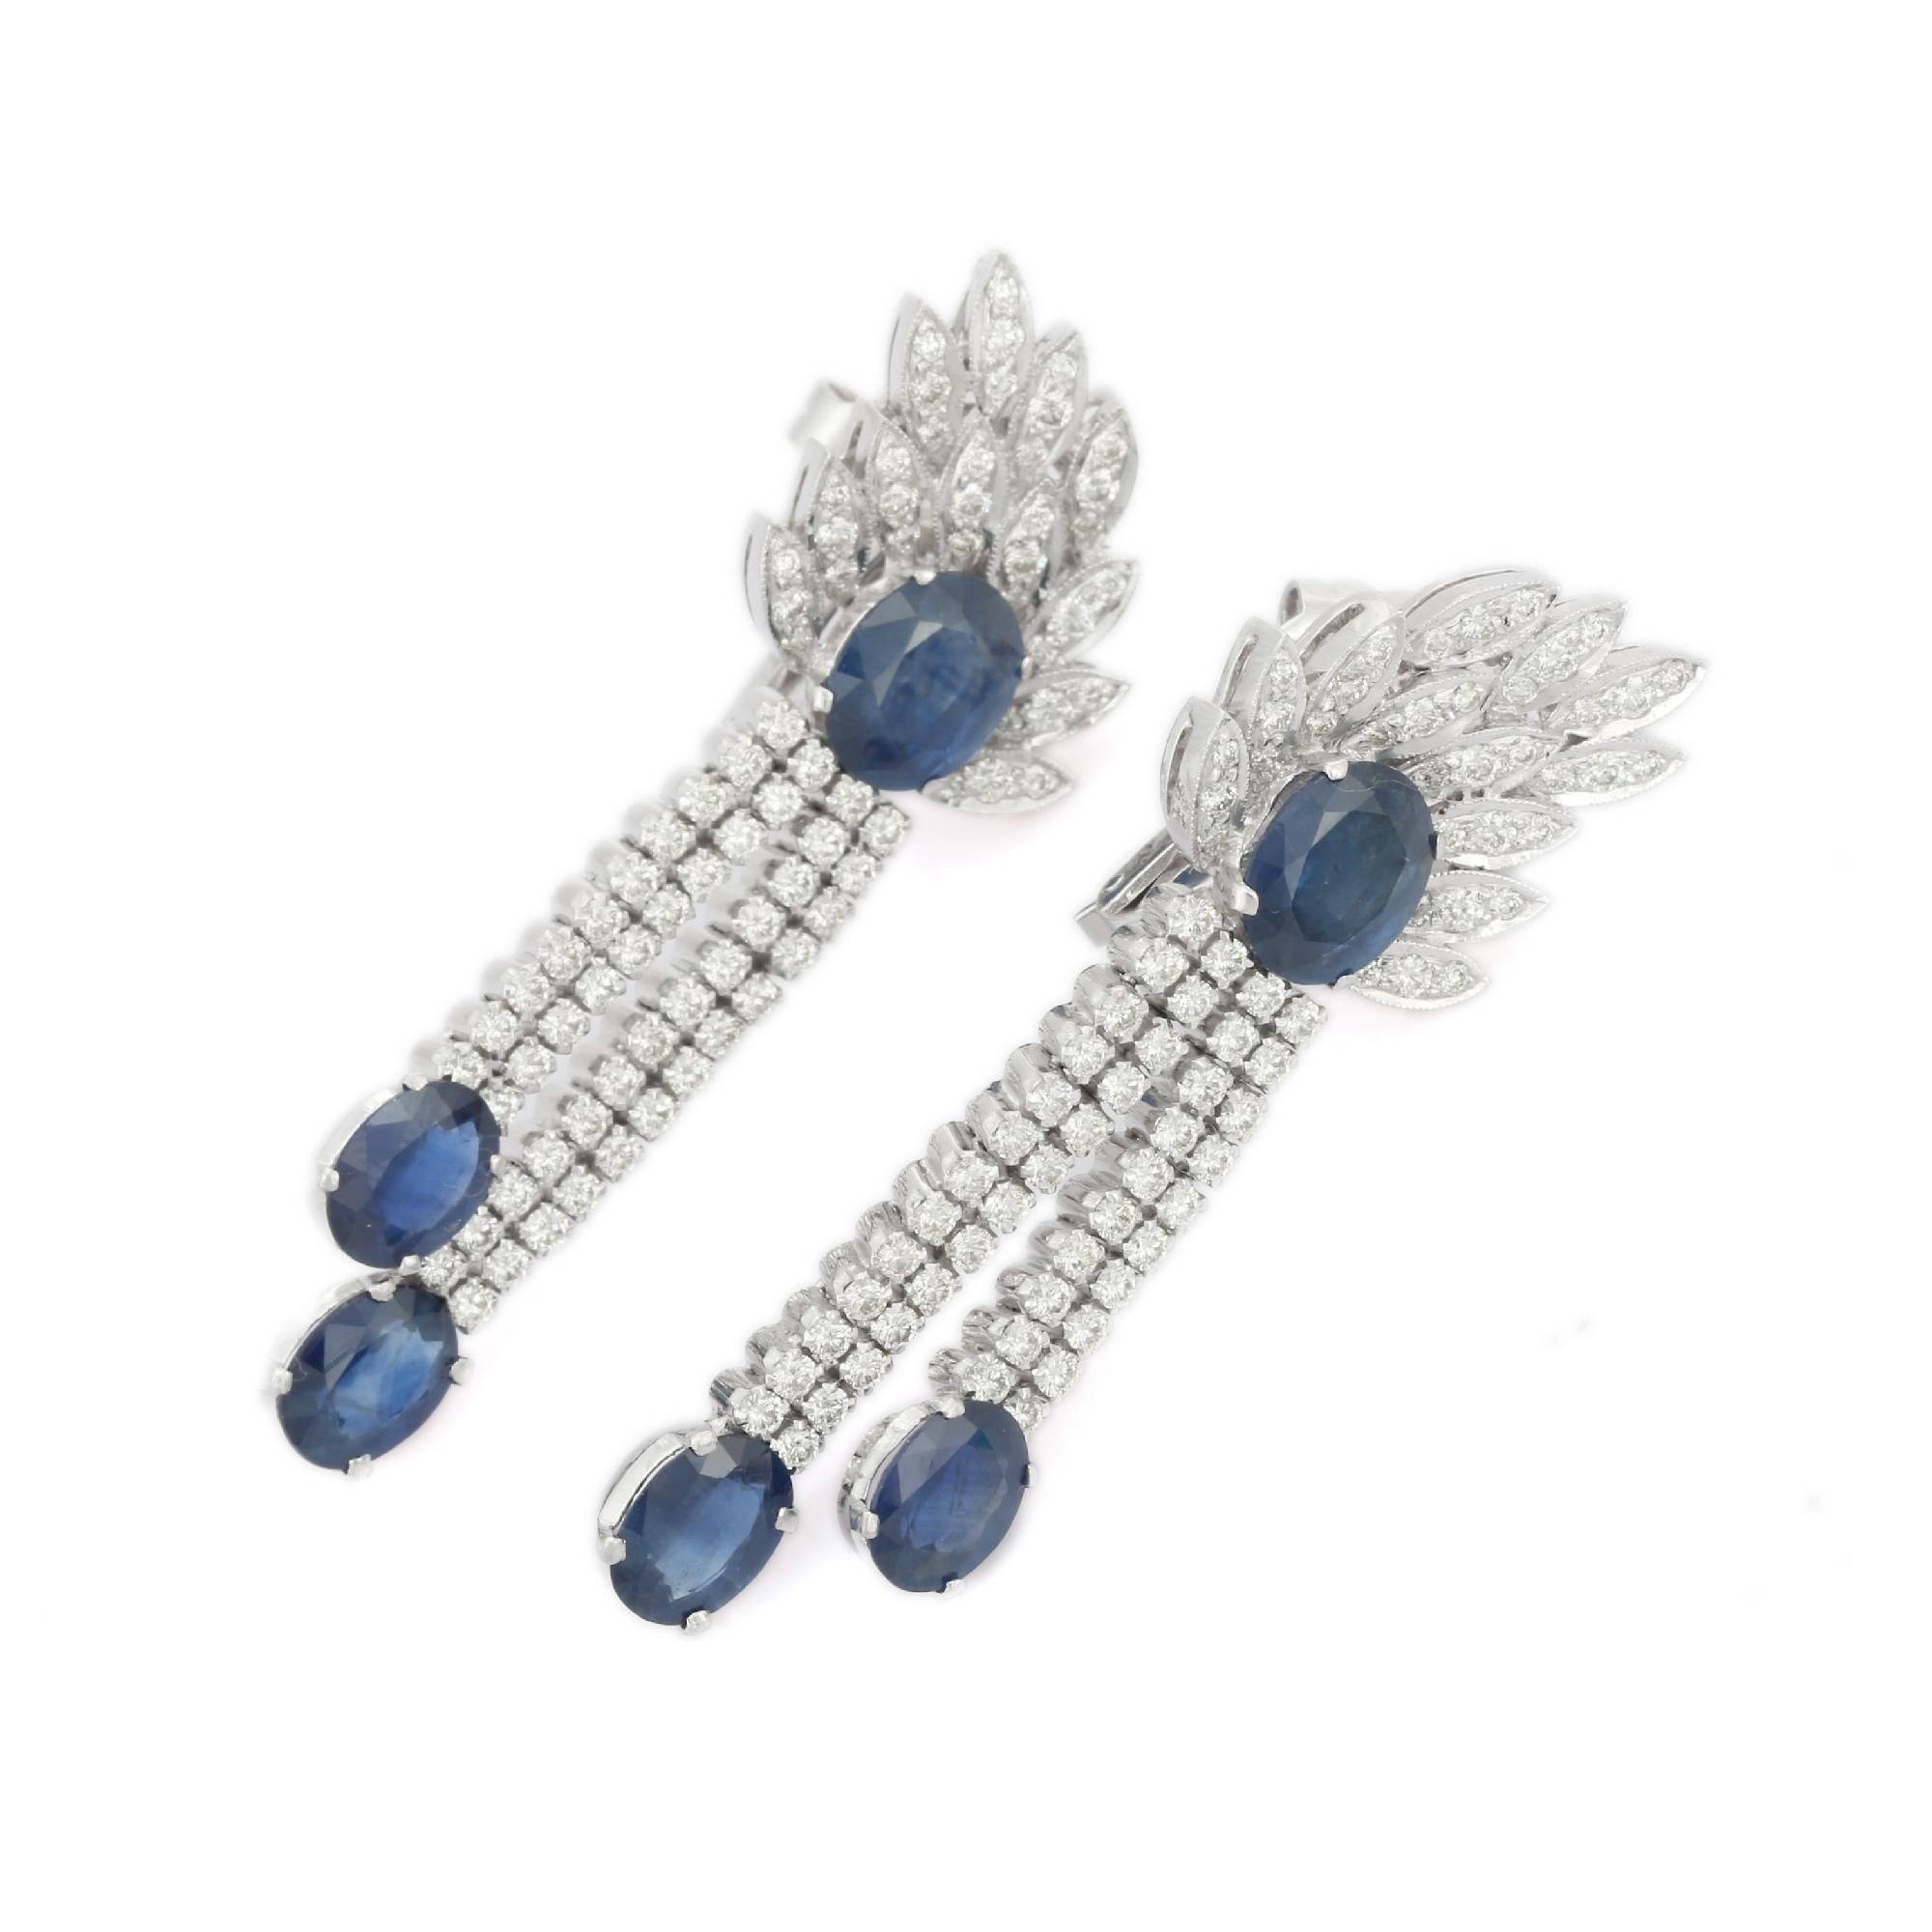 Sapphire Diamond Fine Earrings in 18K Gold to make a statement with your look. You shall need statement dangle earrings to make a statement with your look. These earrings create a sparkling, luxurious look featuring oval cut sapphire.
Sapphire